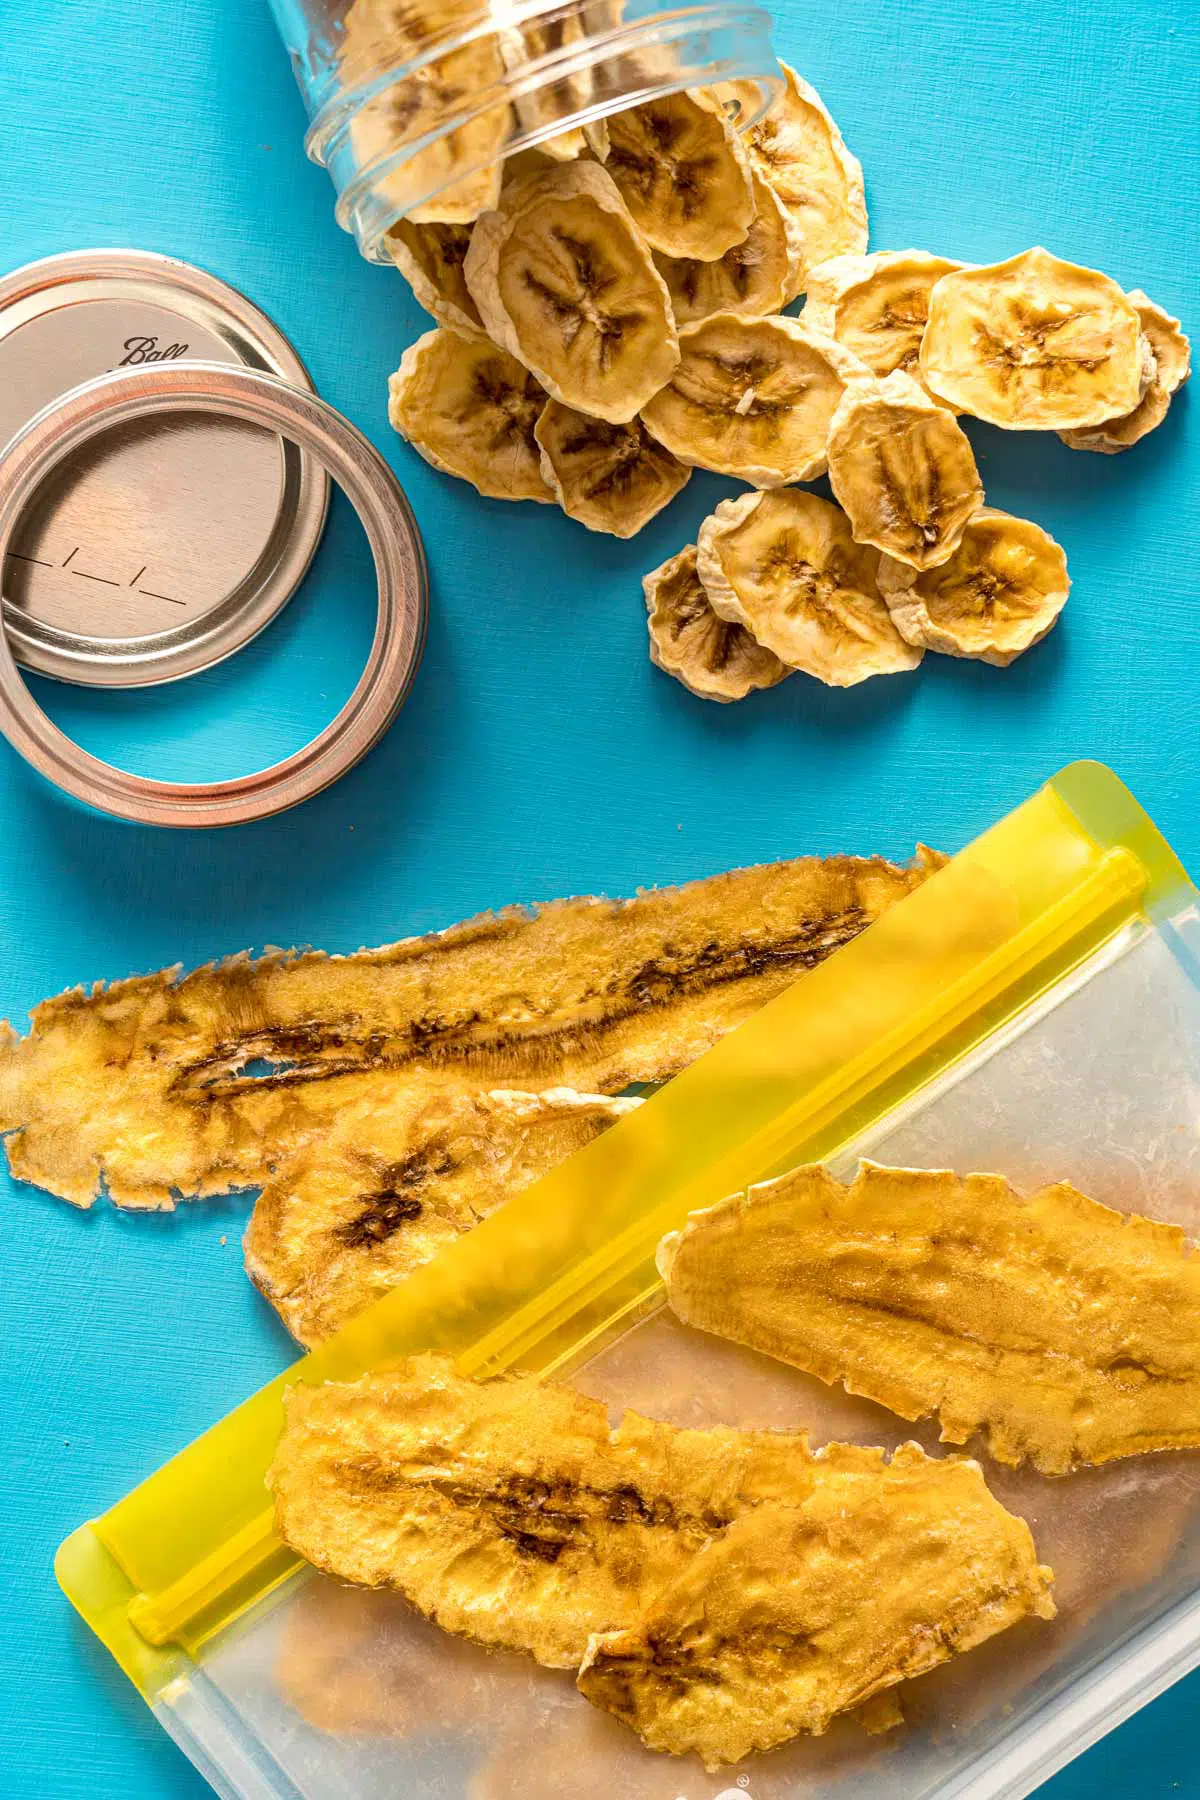 Dried bananas with a zip top bag